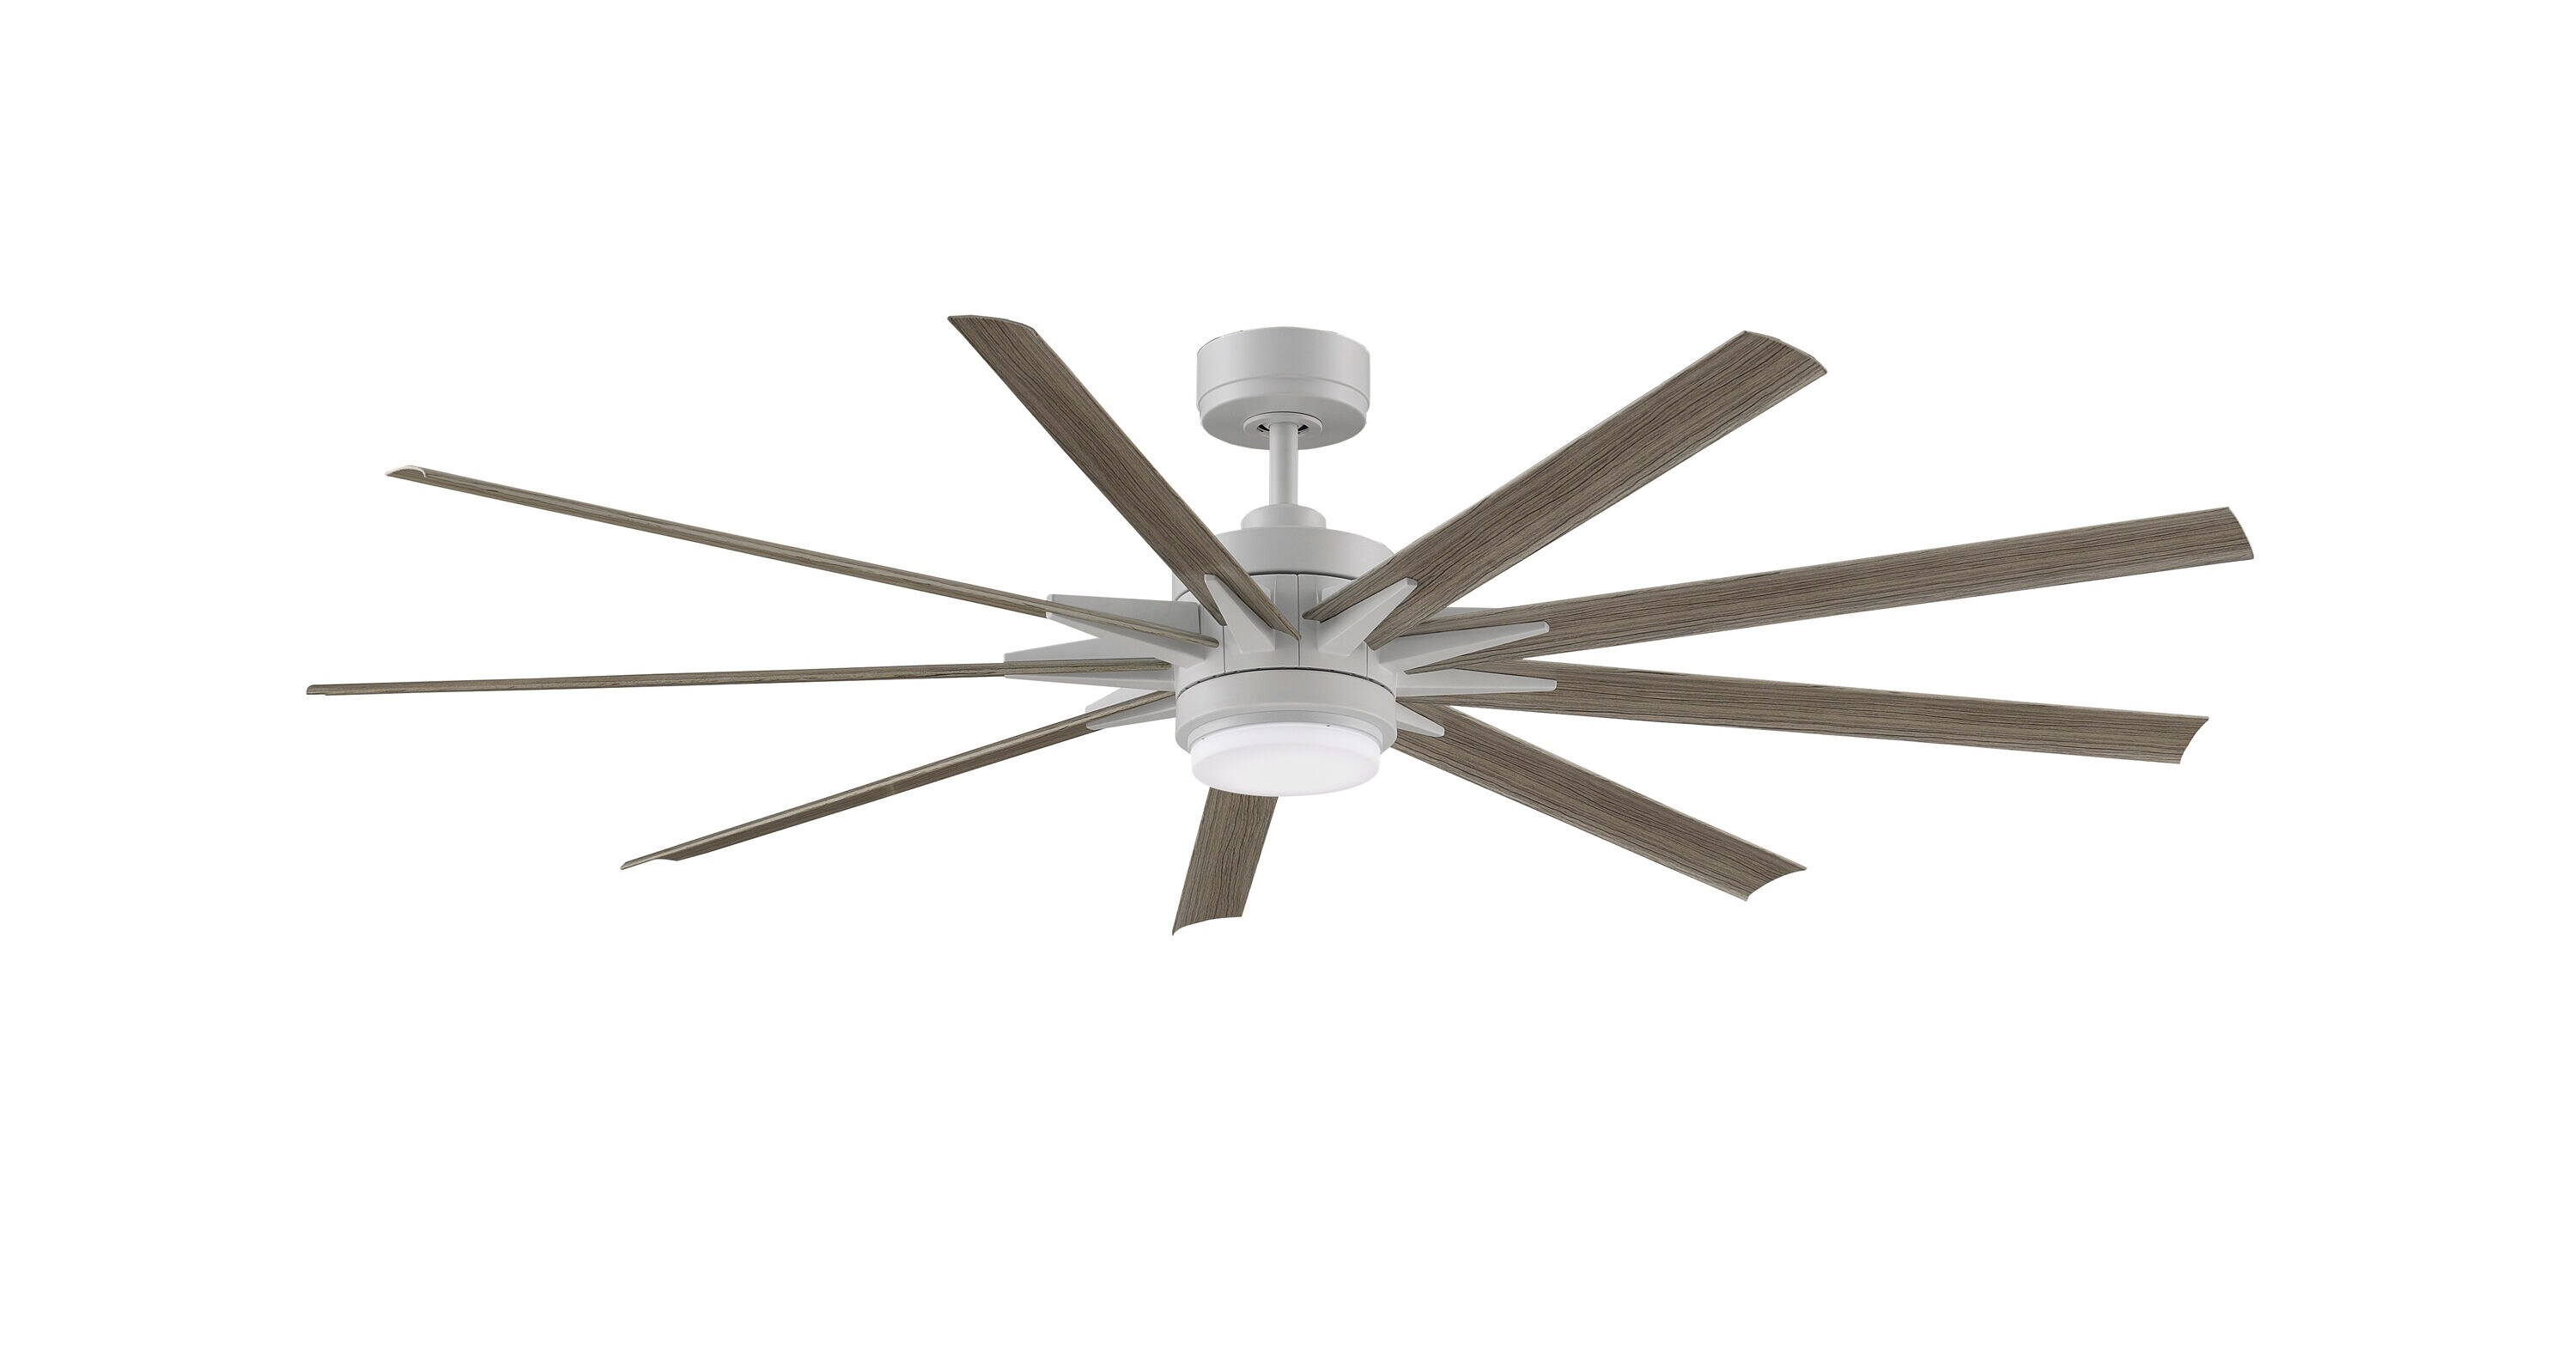 Odyn Custom 72-in Matte White Color-changing LED Indoor/Outdoor Smart Ceiling Fan with Light Remote (9-Blade) Walnut | - Fanimation FPD8152MWW-72WEW